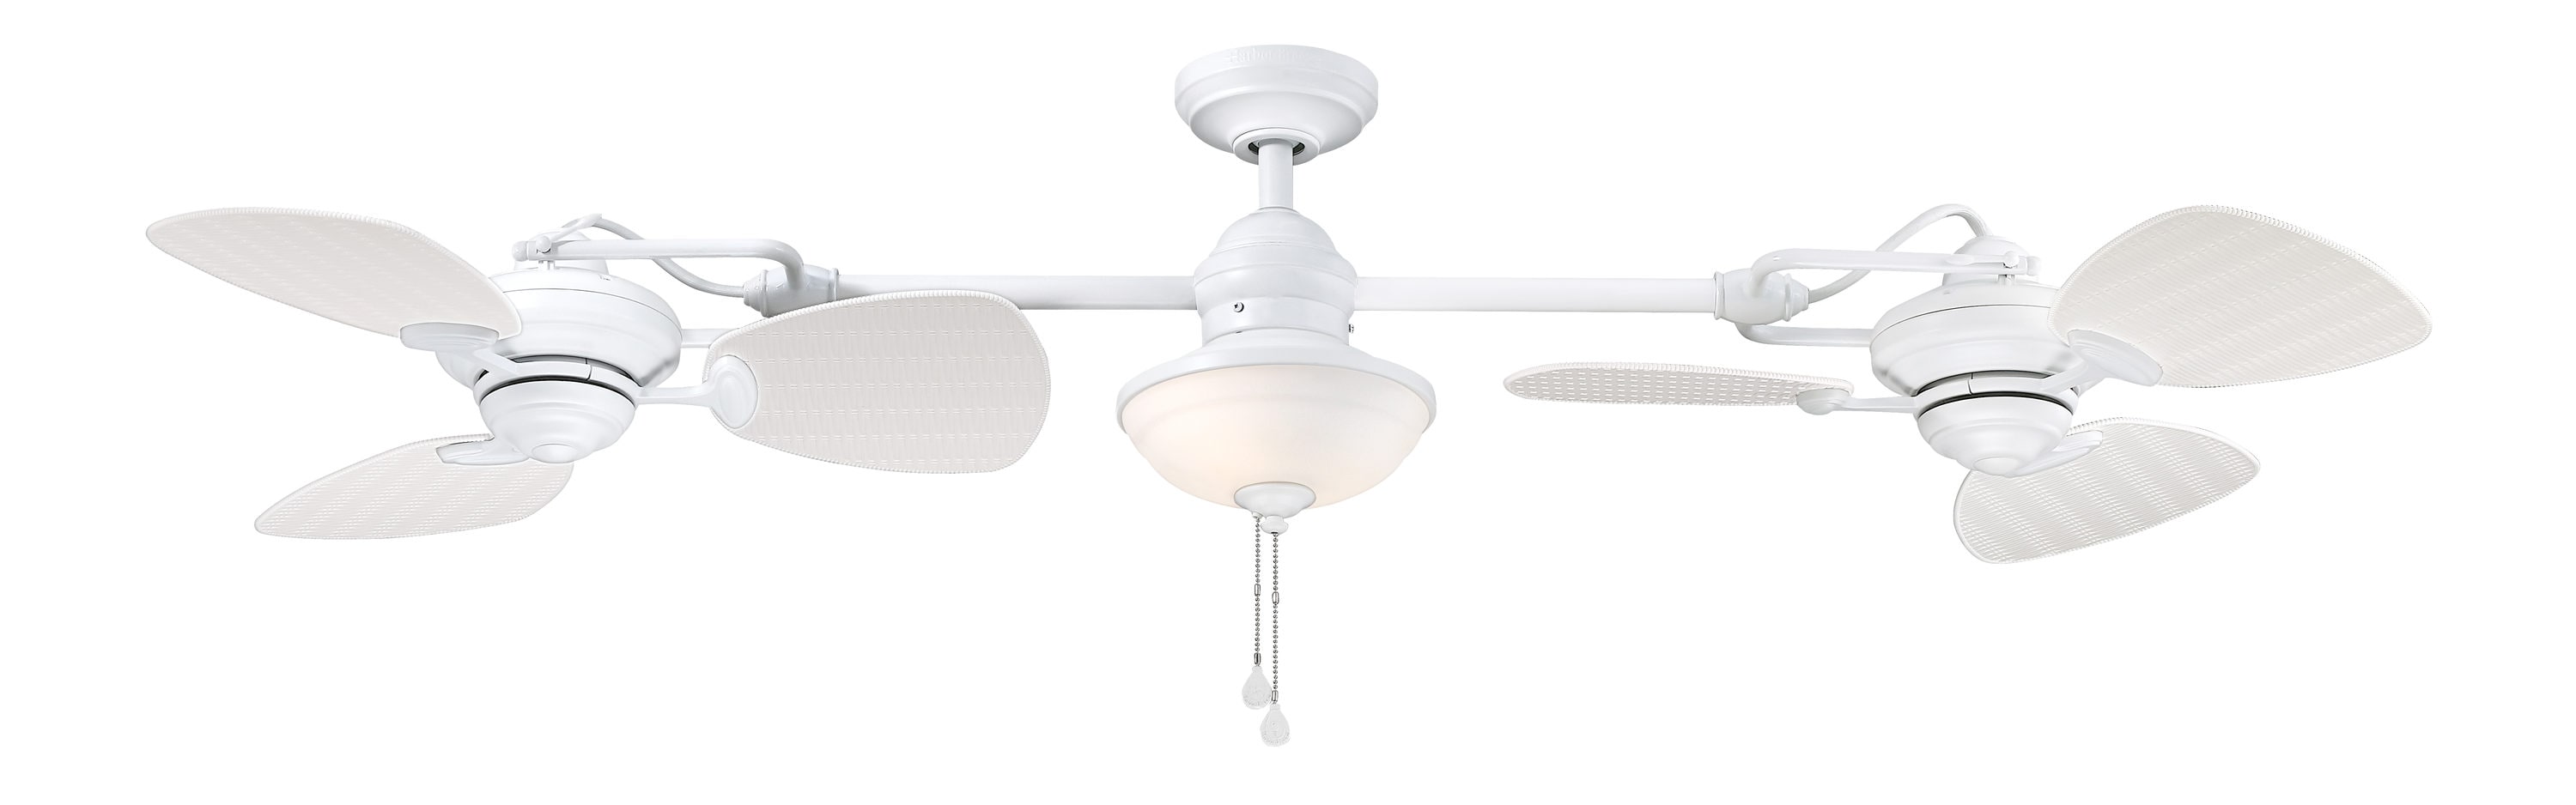 Twin Breeze II 74-in White LED Indoor/Outdoor Ceiling Fan with Light (6-Blade) | - Harbor Breeze L0982-CWH